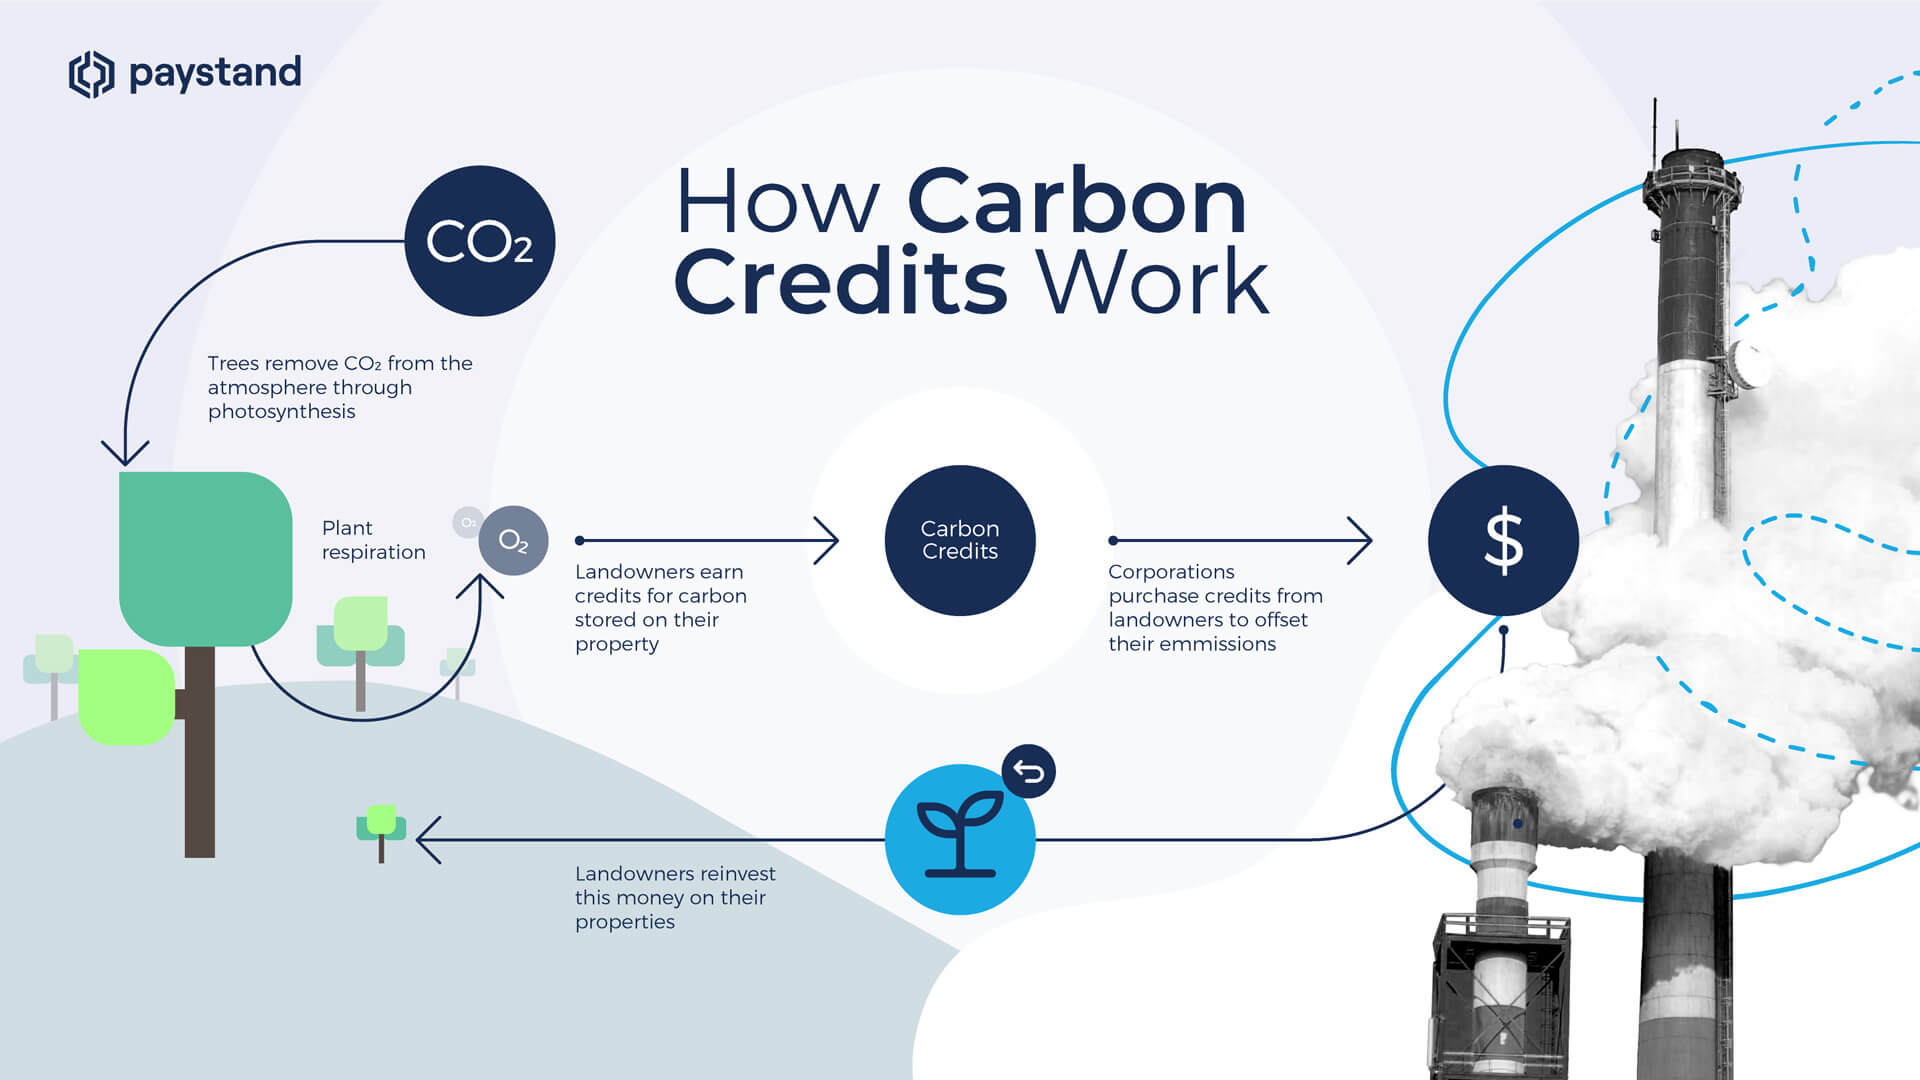 CARBON-CREDITS-INFOGRAPHIC-02 (1)